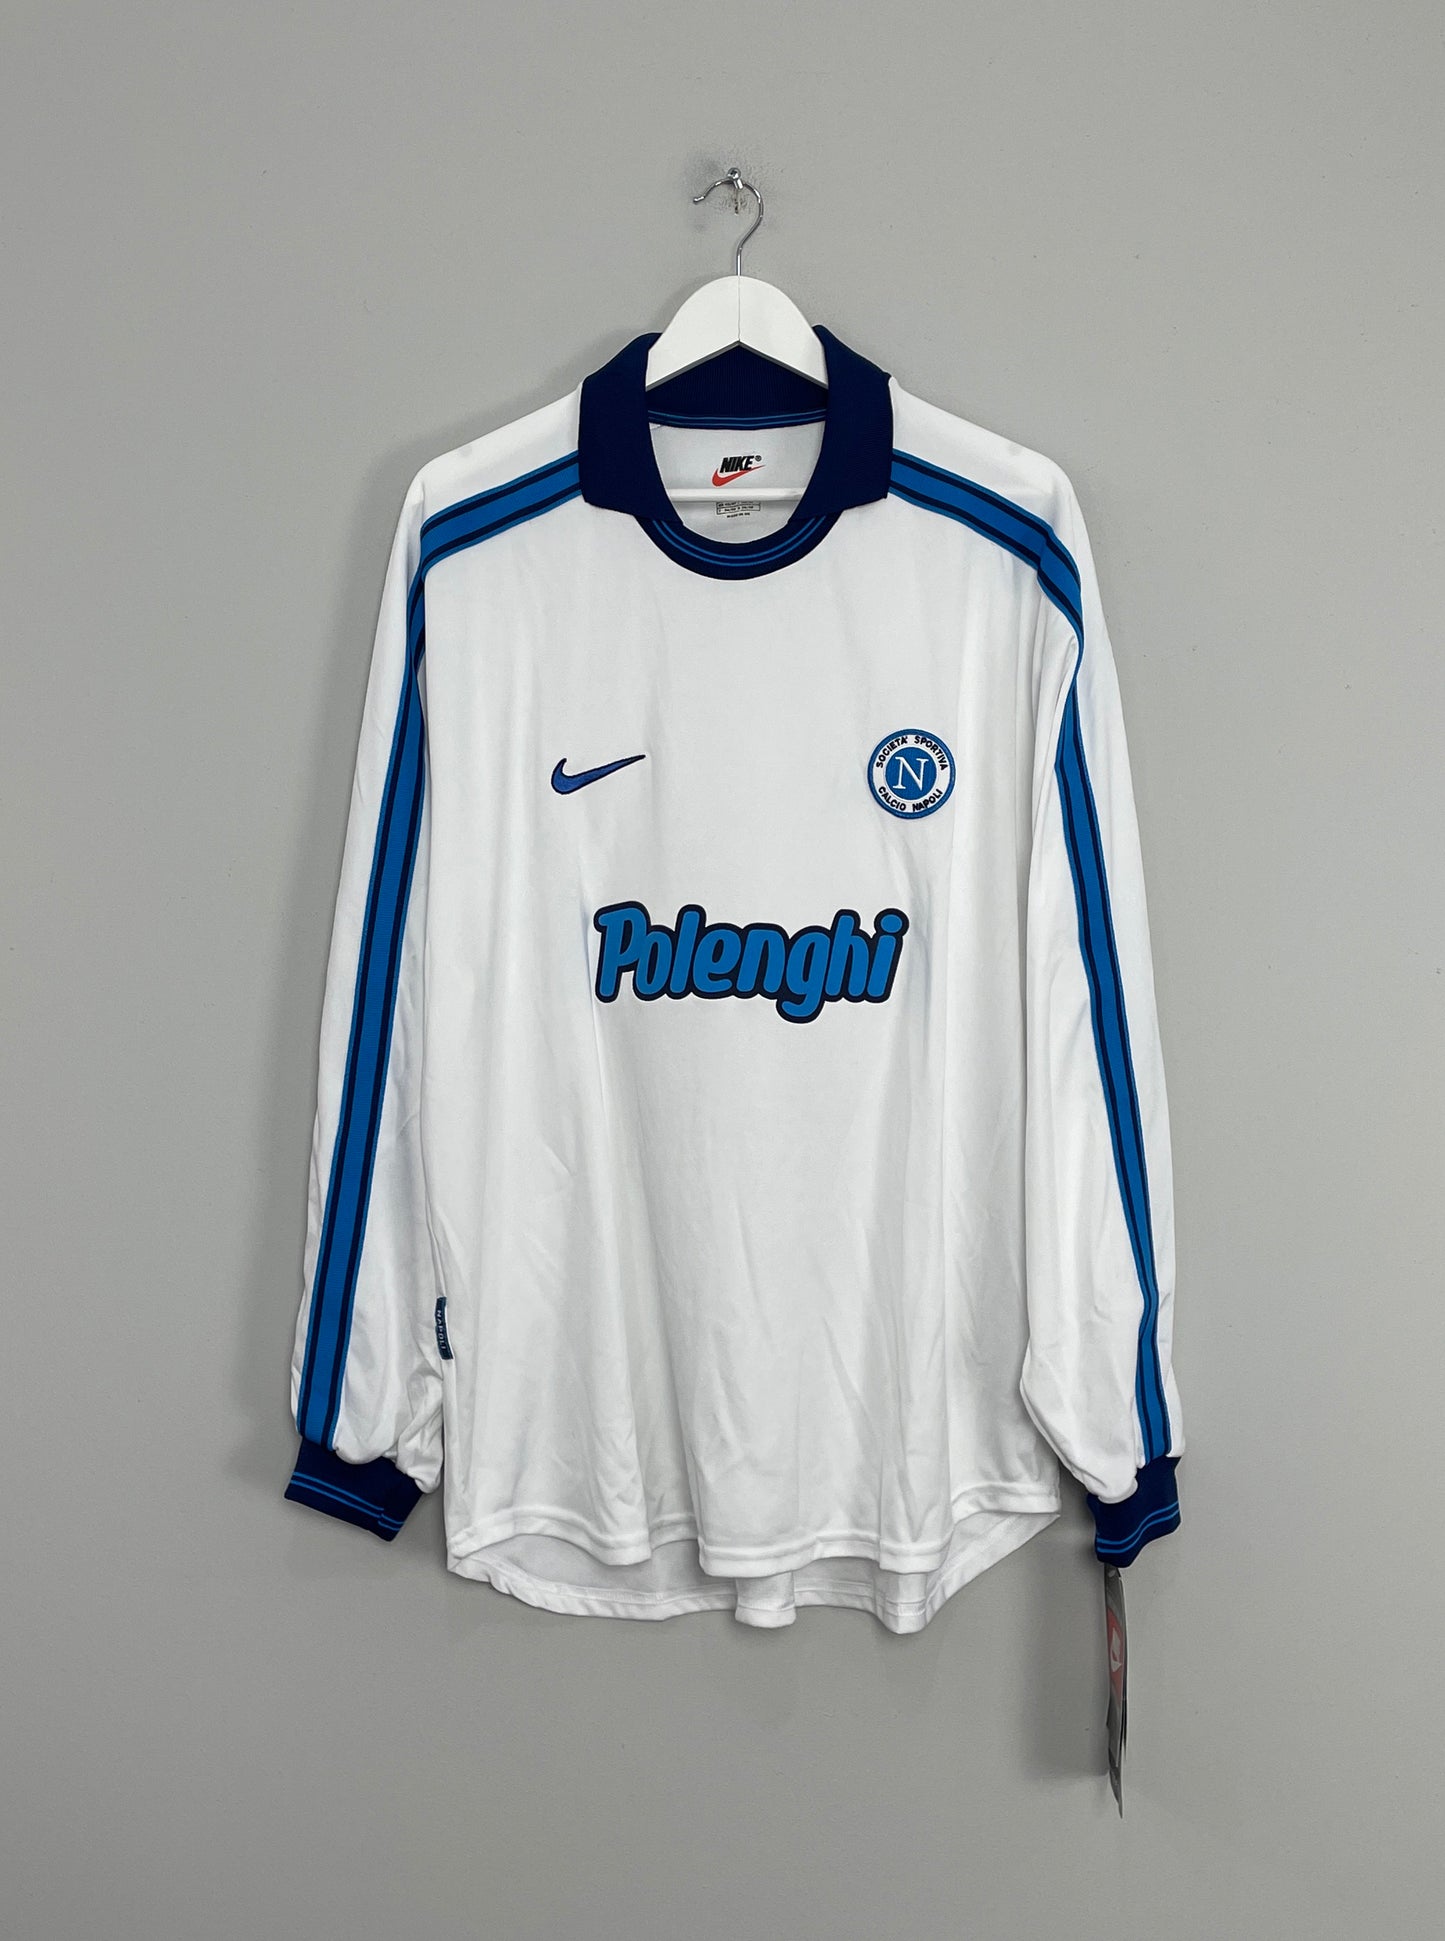 Image of the Napoli shirt from the 1998/99 season